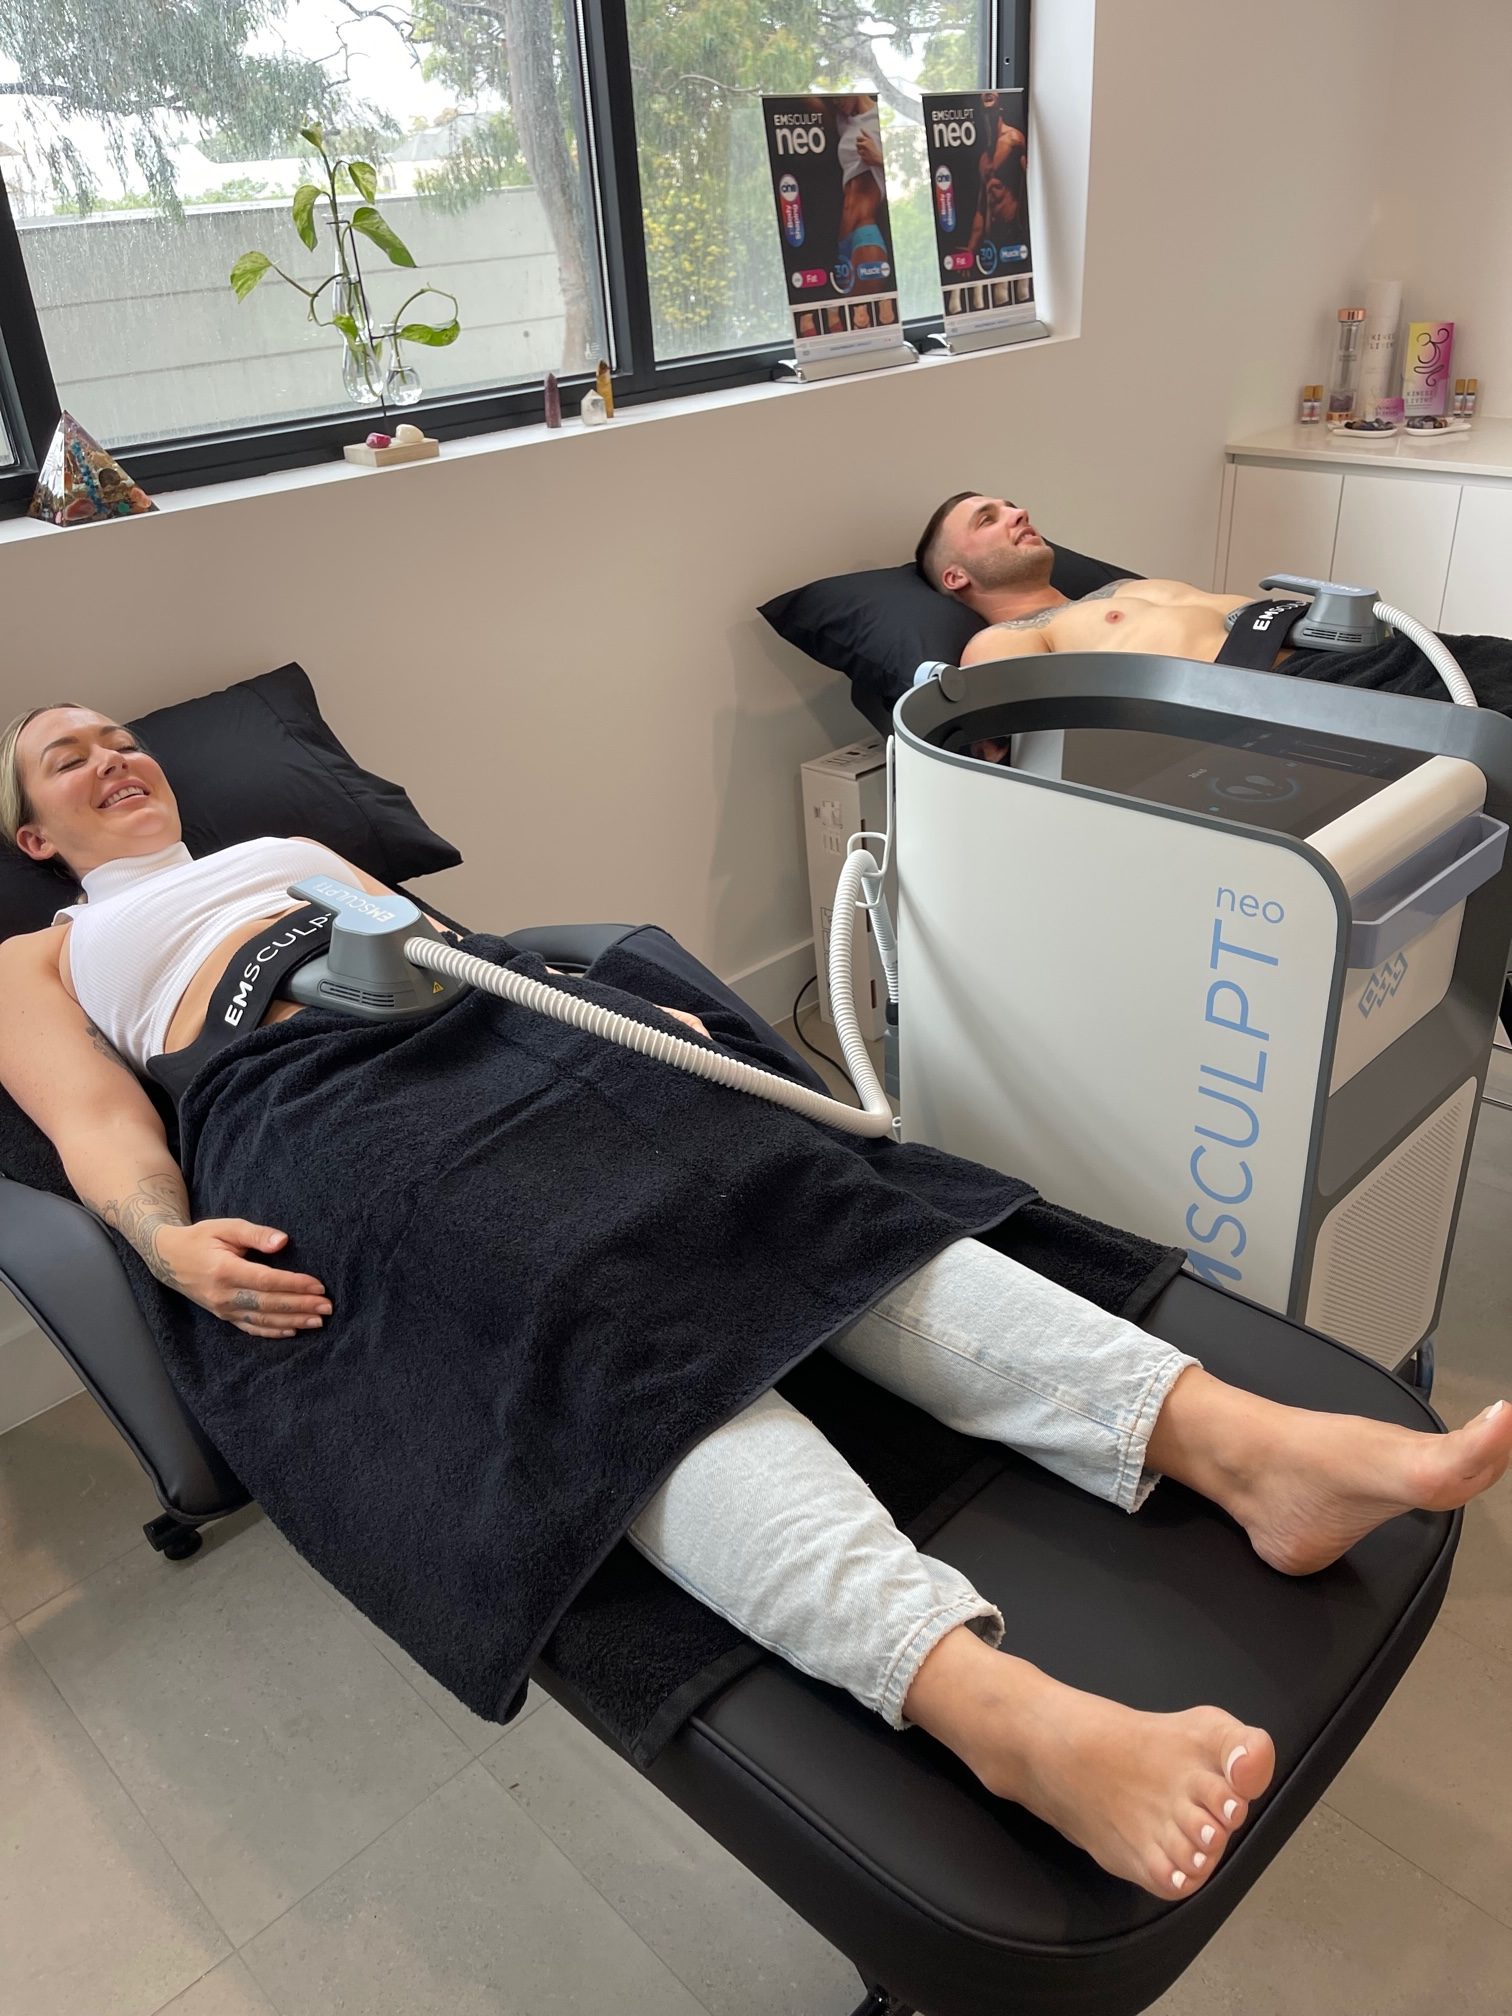 WIN a Four Session Program of Emsculpt NEO Tummy Treatment or Exilis Ultra from Pulse Body Rejuvenation!